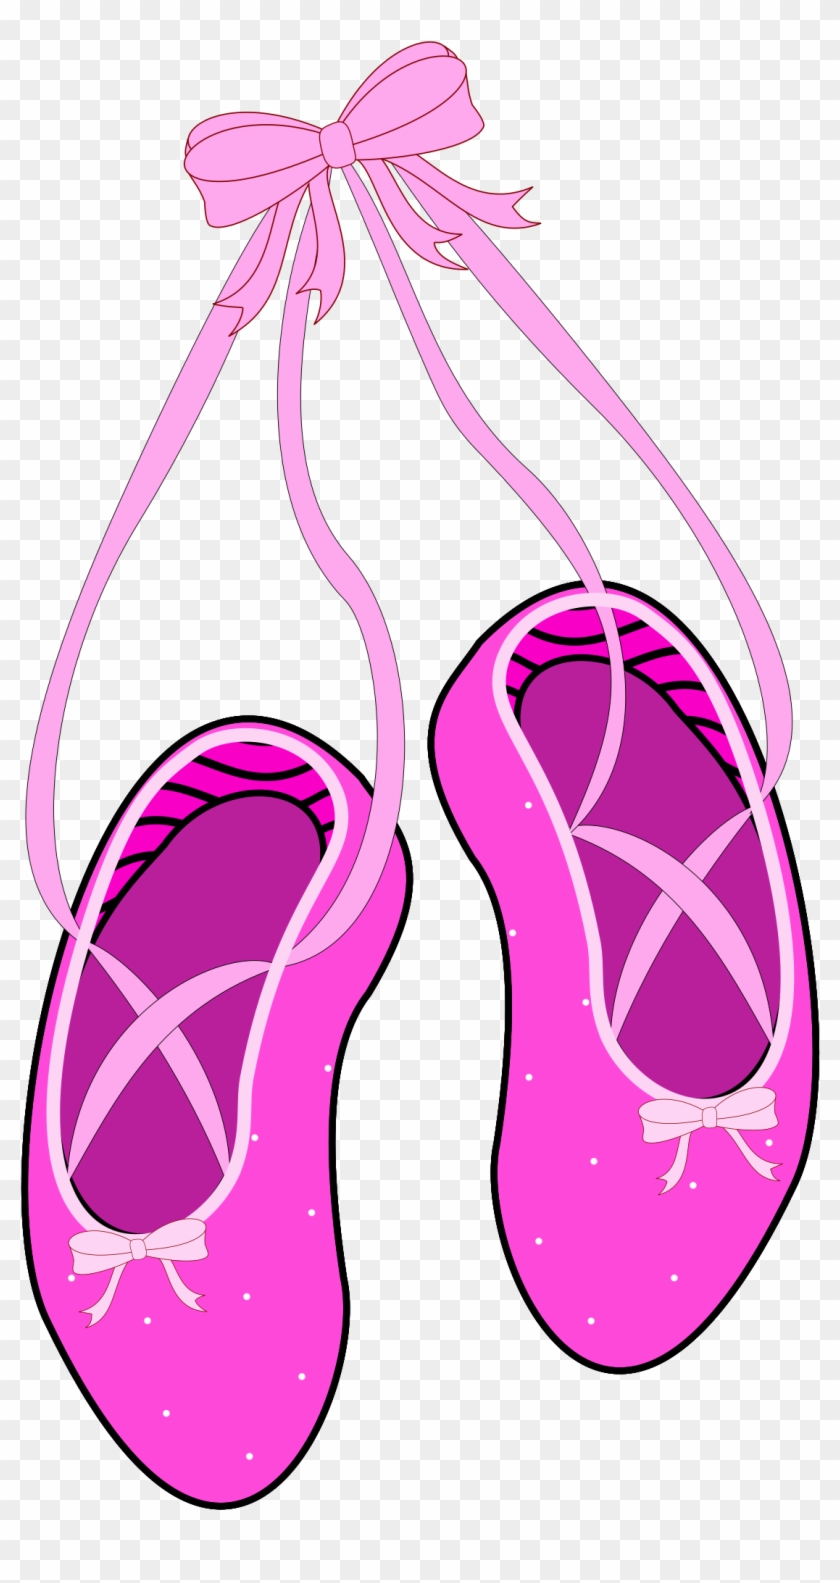 Manificent Design Ballet Shoes With Ribbons Clipart - Manificent Design Ballet Shoes With Ribbons Clipart #187519